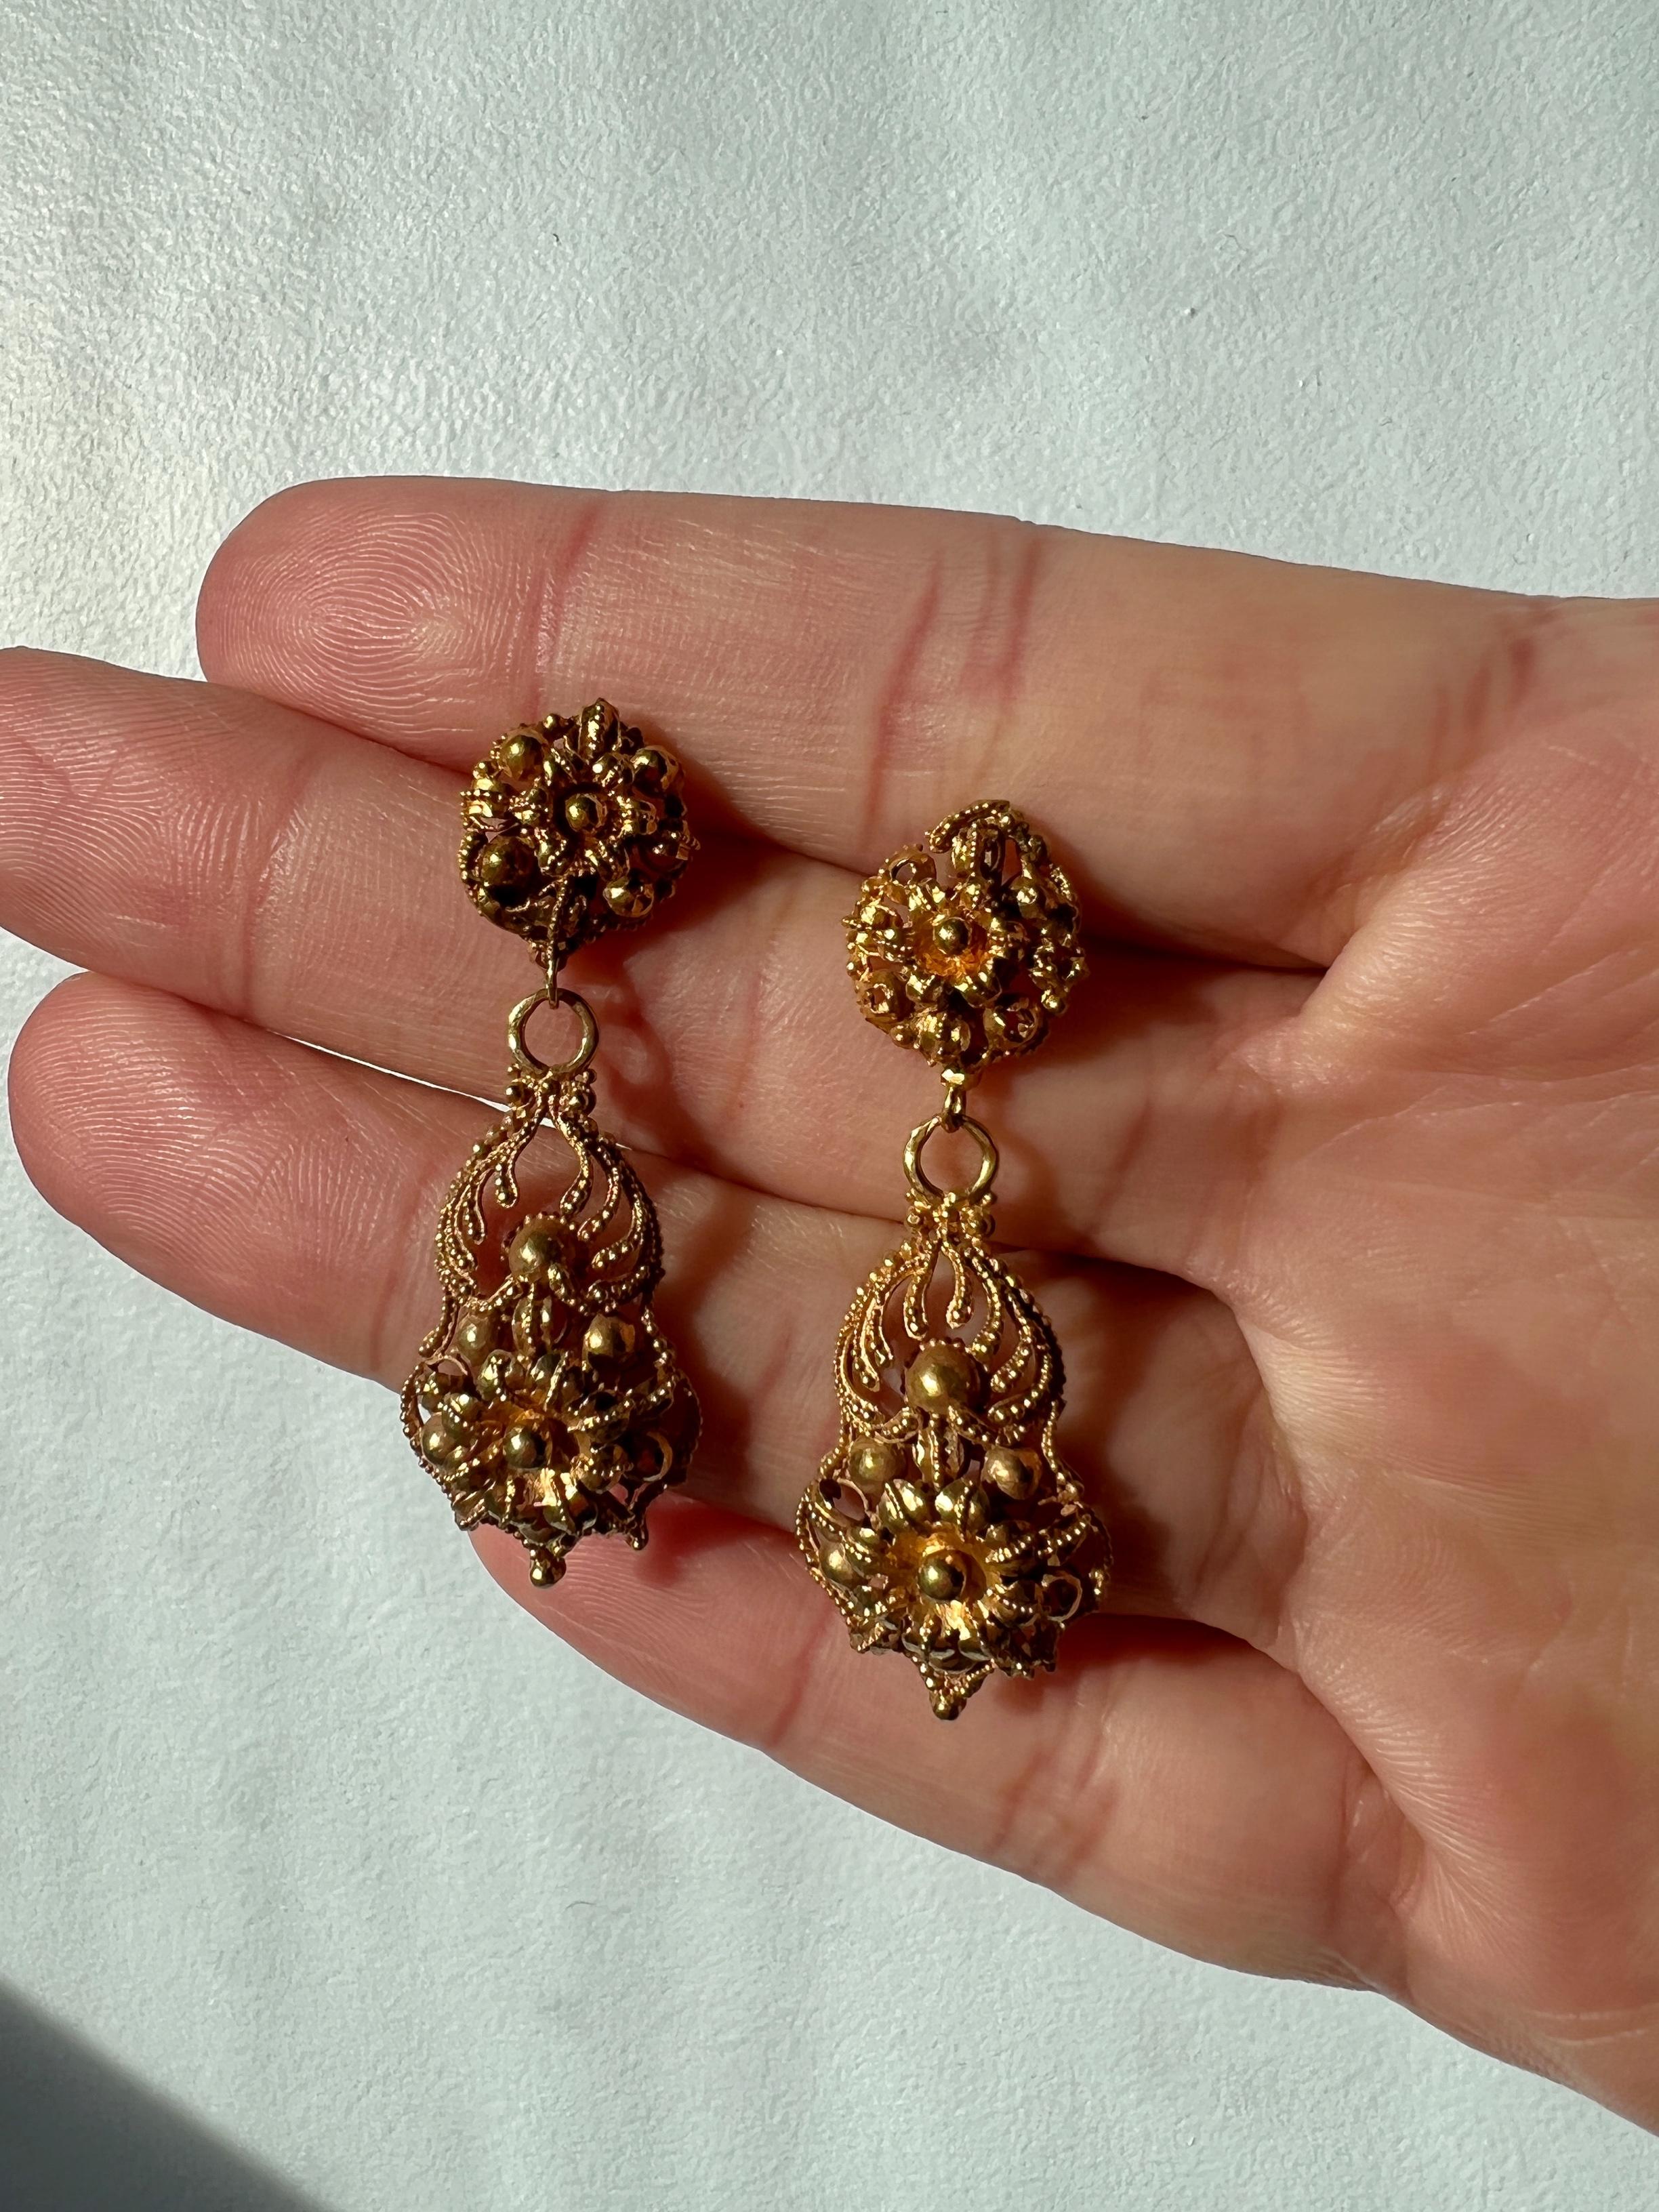 Victorian Beautiful Antique 18k Yellow Gold Floral Filigree Earrings For Sale